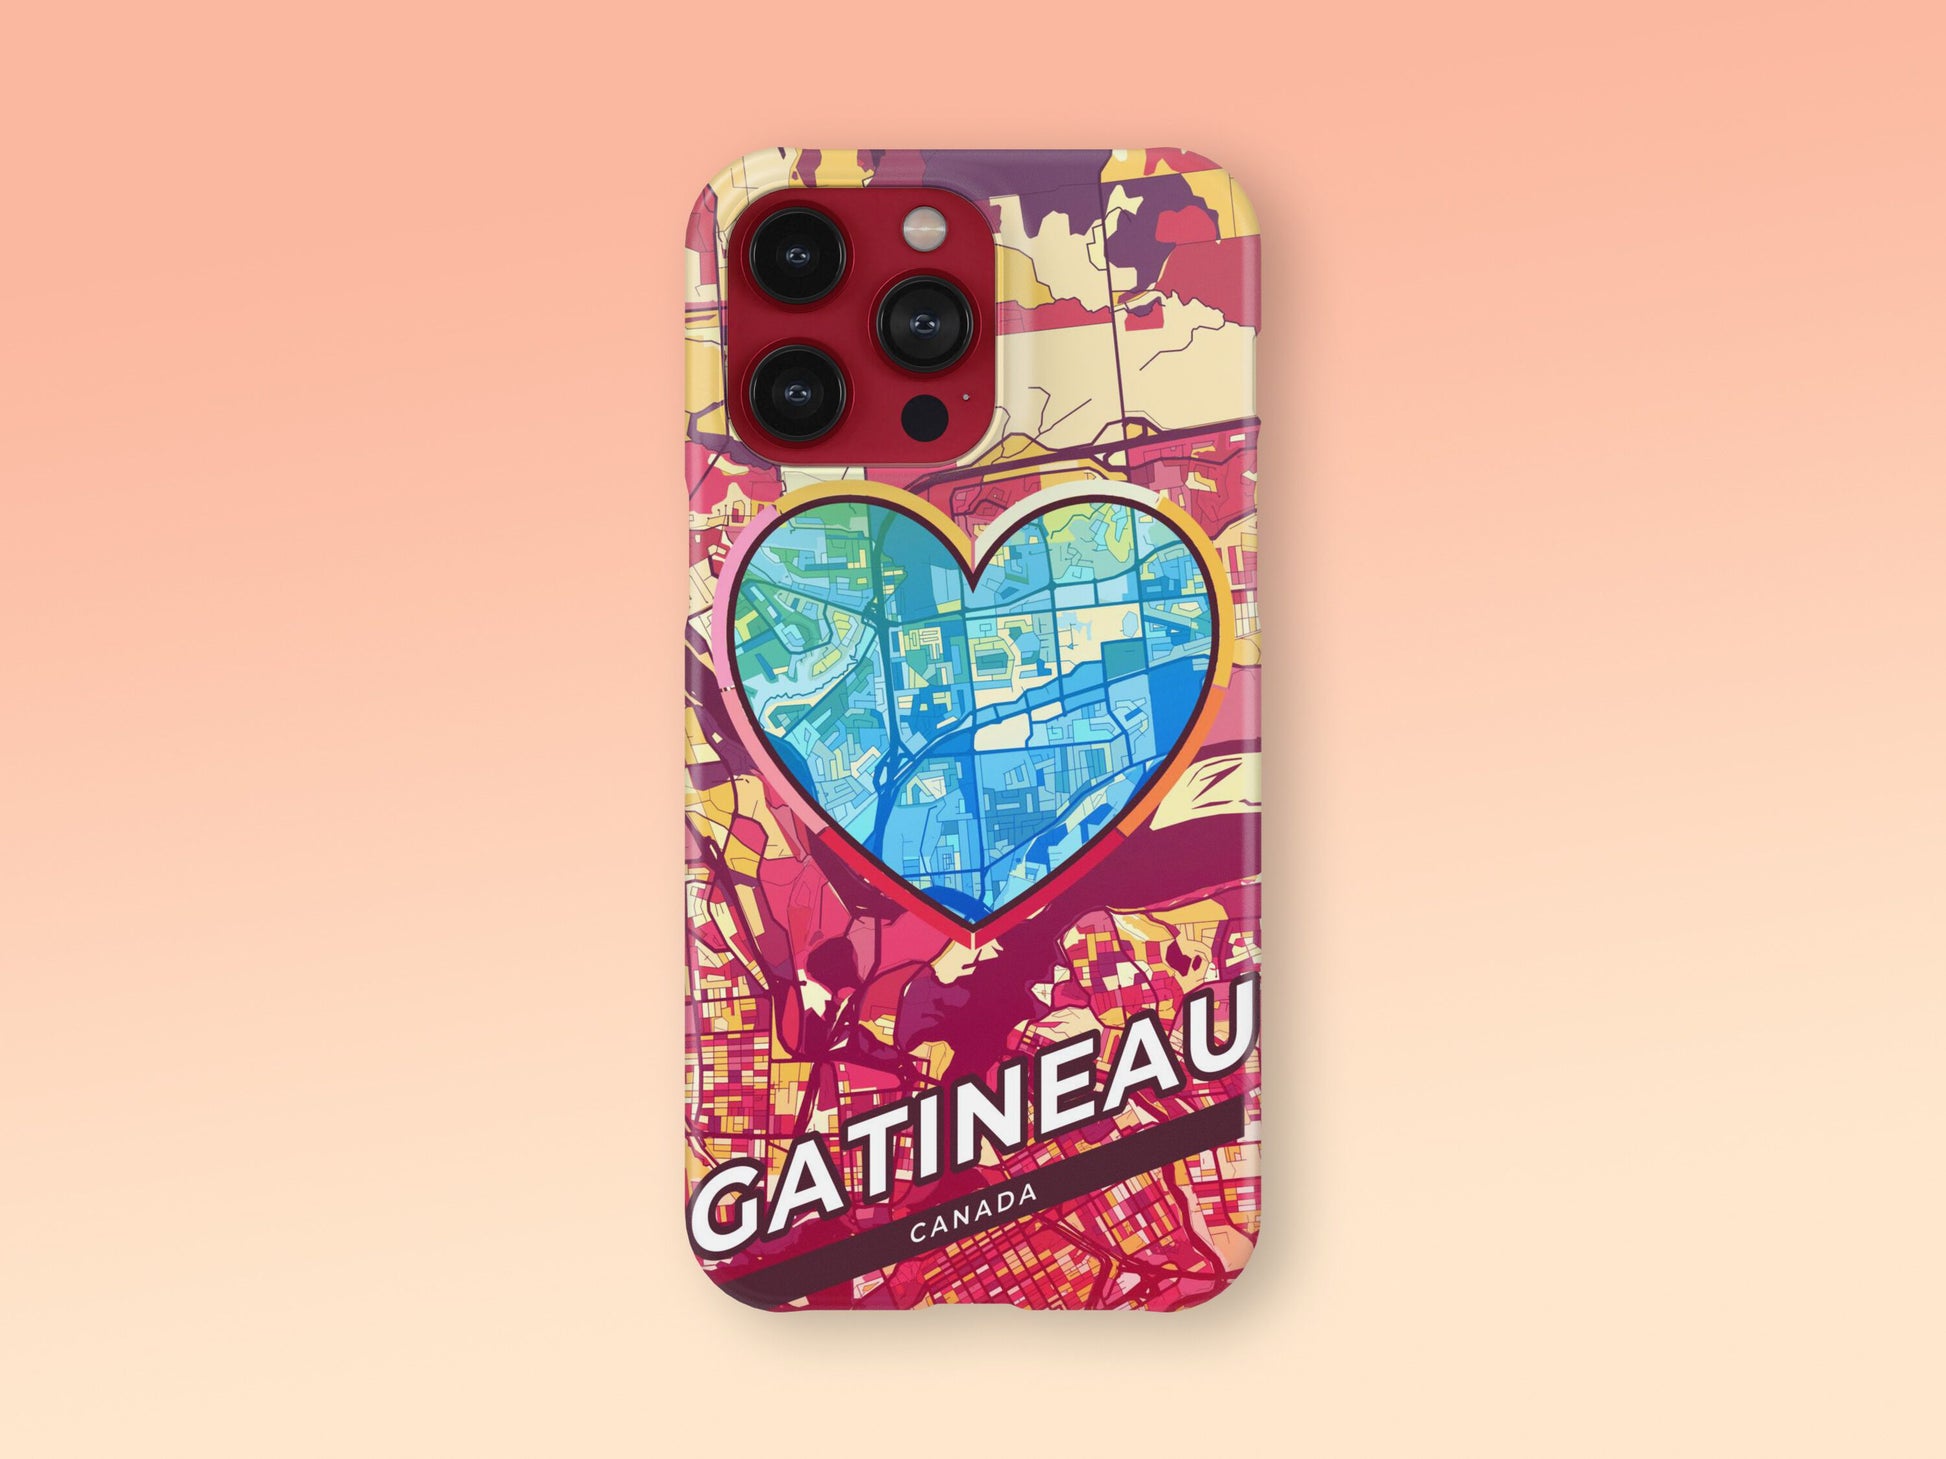 Gatineau Canada slim phone case with colorful icon. Birthday, wedding or housewarming gift. Couple match cases. 2